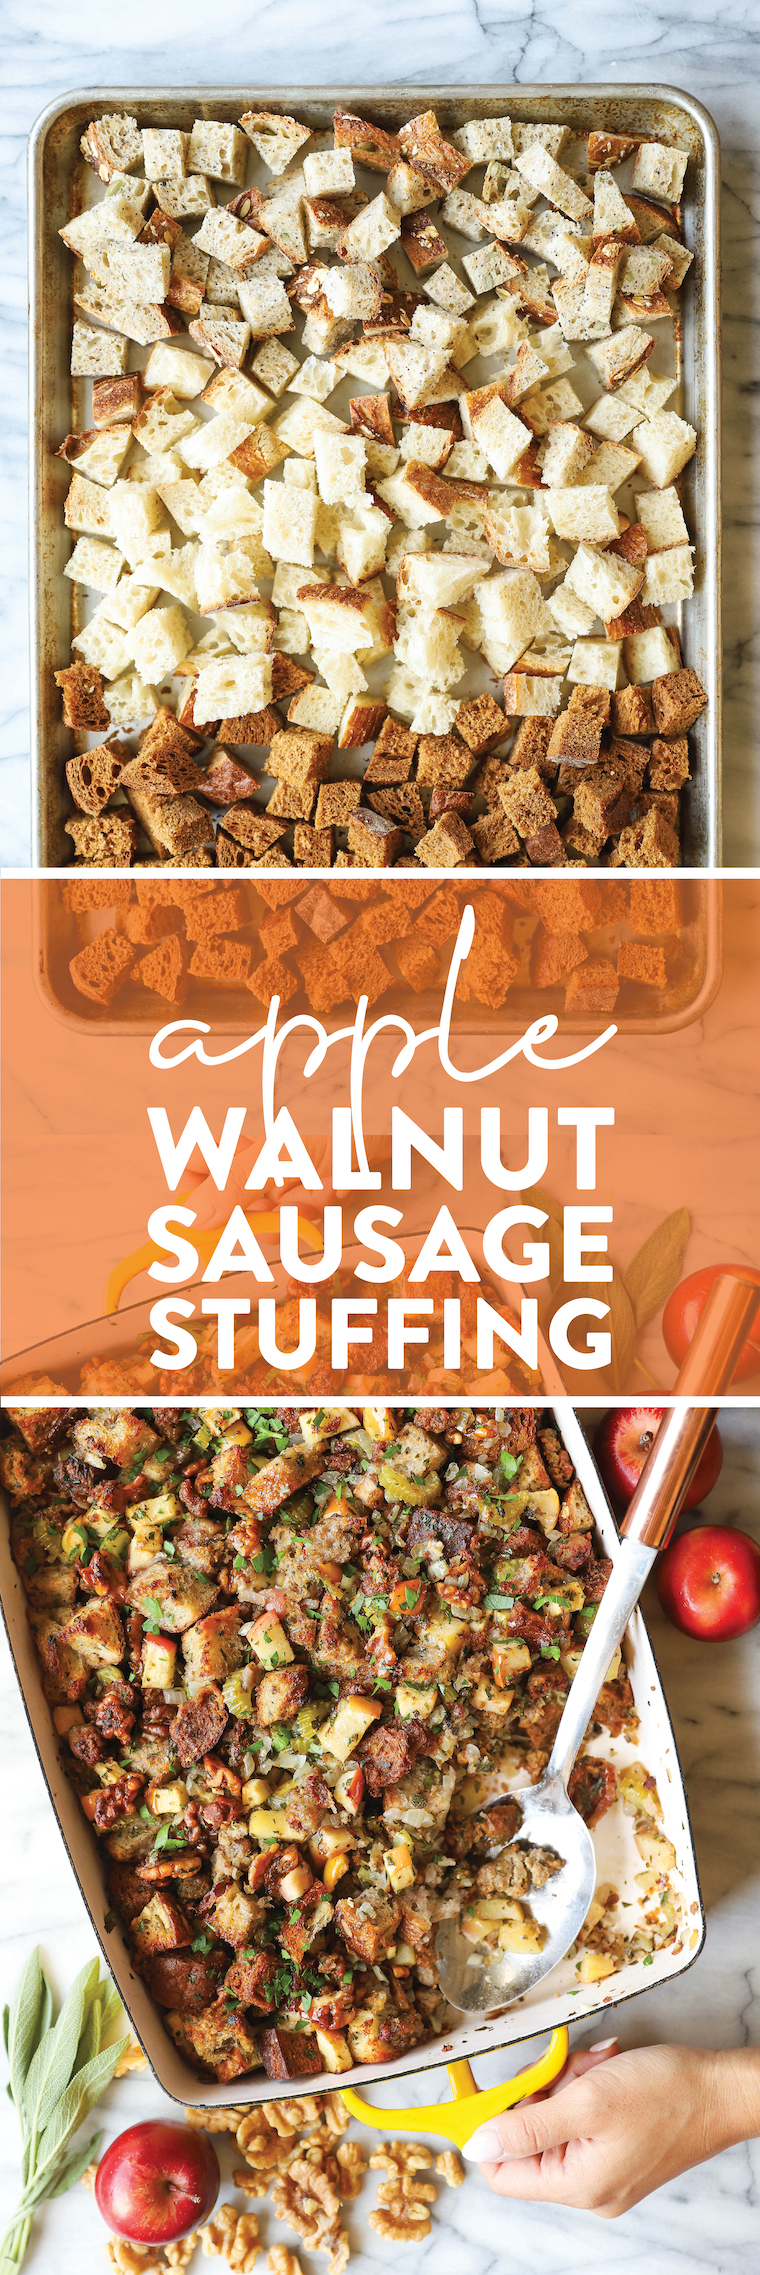 Apple Walnut Sausage Stuffing - Make your stuffing ahead of time! It's easy, quick, and flavorful with crumbled sausage, fresh herbs, and apples! SO GOOD!!!